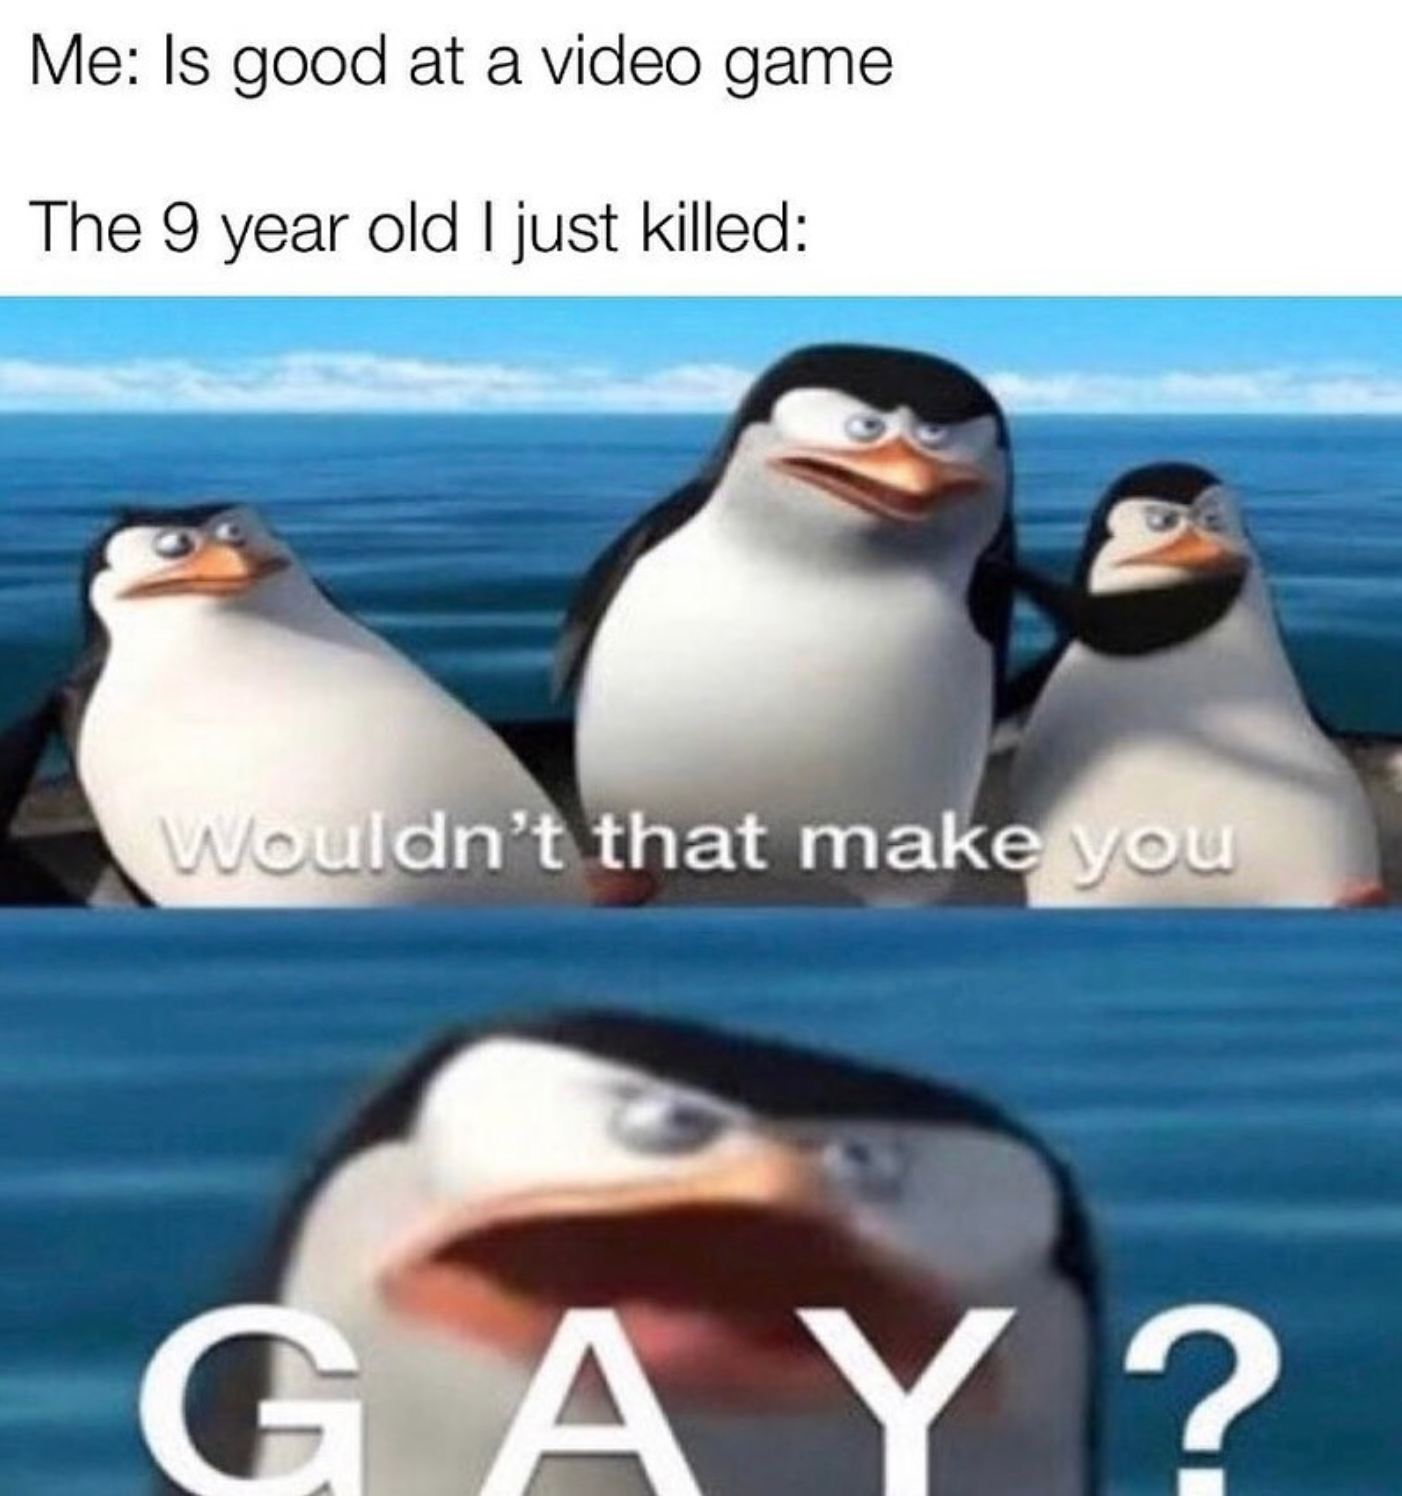 funny gaming memes - memes about 5 year olds - Me Is good at a video game The 9 year old I just killed Wouldn't that make you Gay?